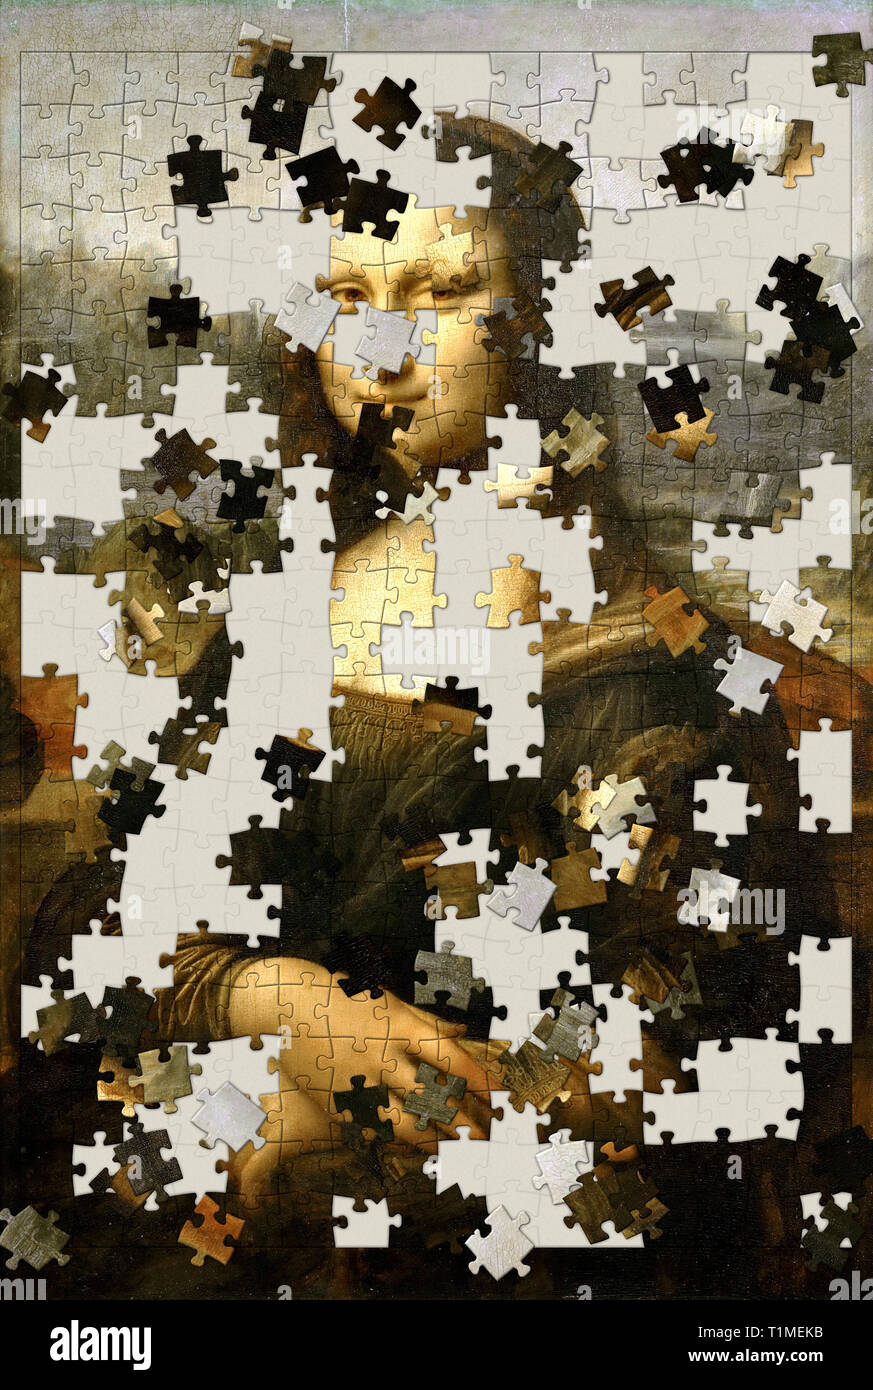 Mona Lisa painting as a jigsaw puzzle unfinished Stock Photo